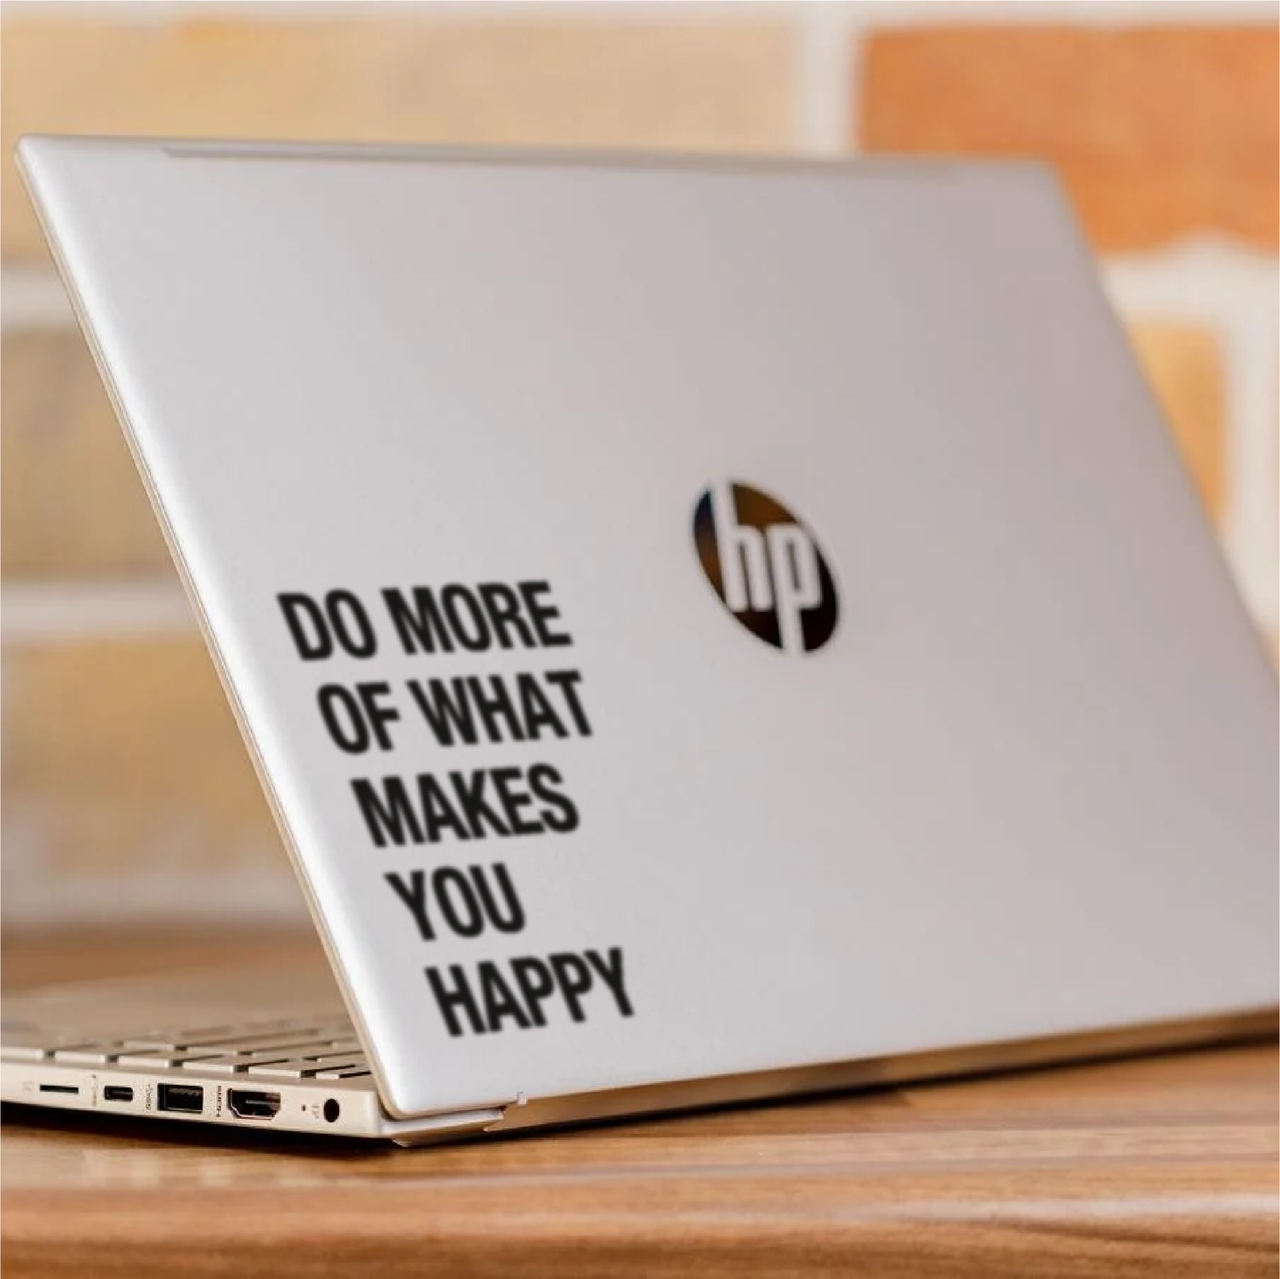 Makes You Happy Laptop Decal